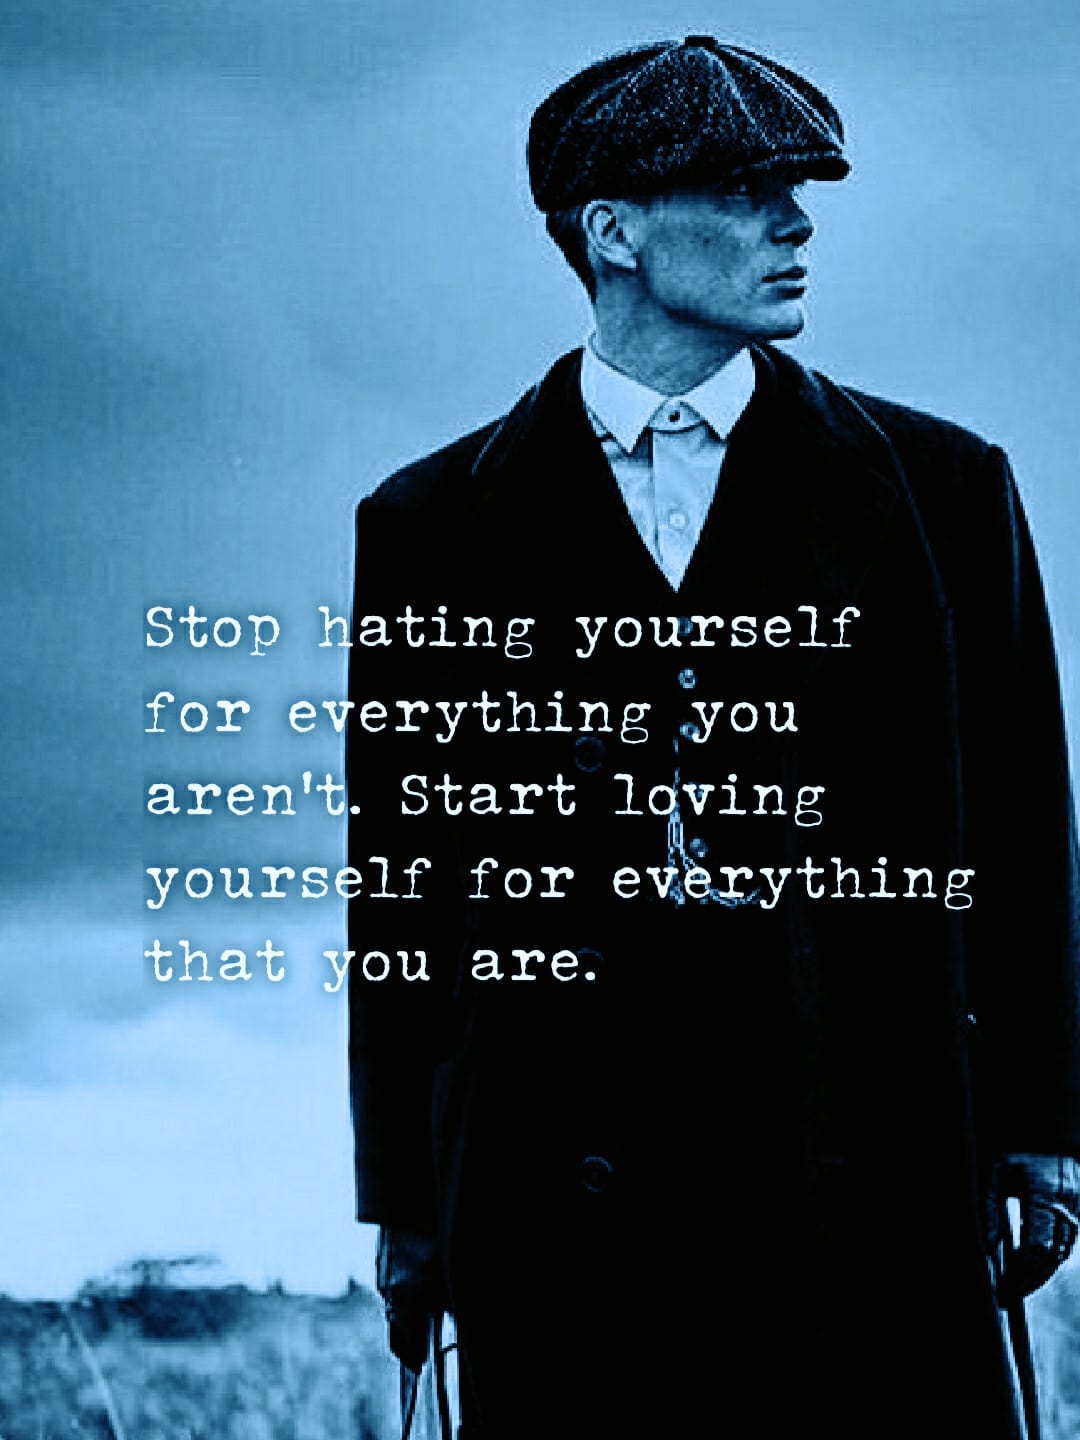 Stop hating yourself for everything you aren’t. Start loving yourself for everything that you are.